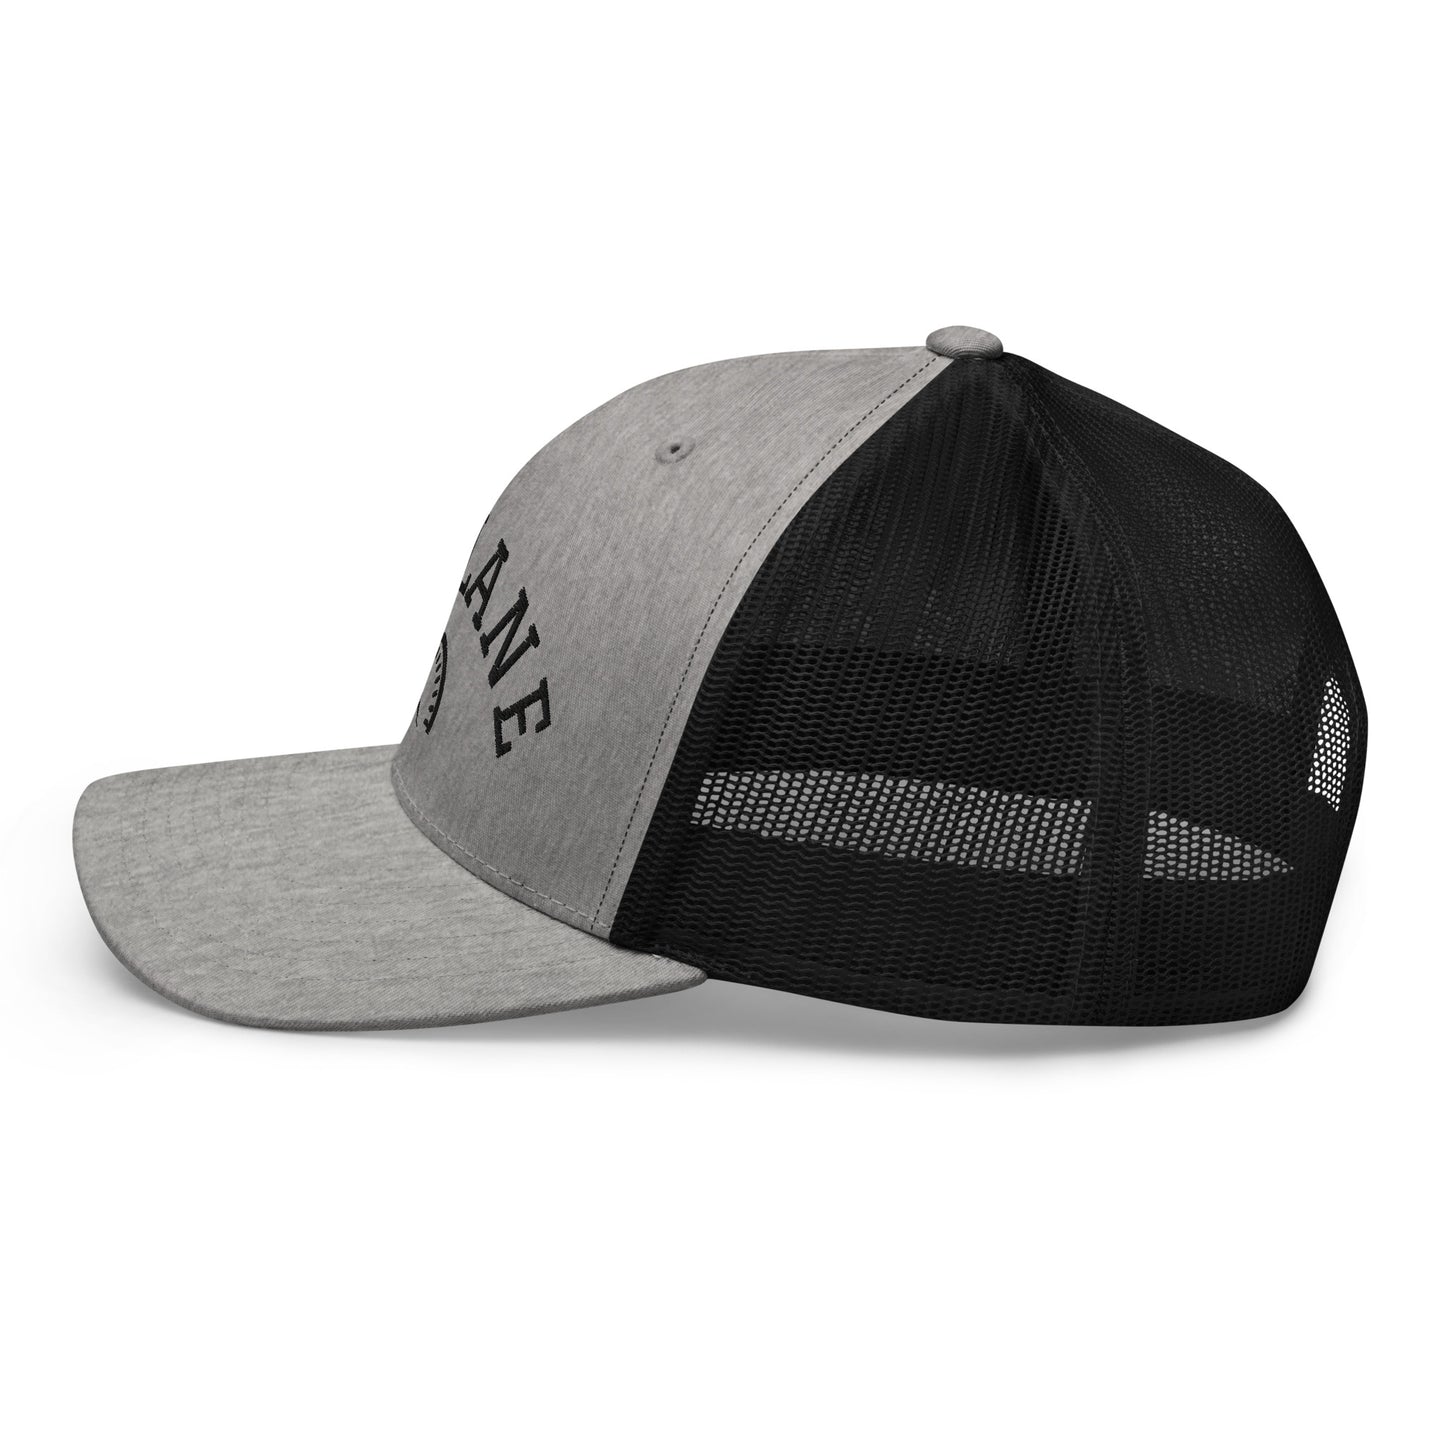 PIT LANE CLOTHING Embroidered Trucker Cap